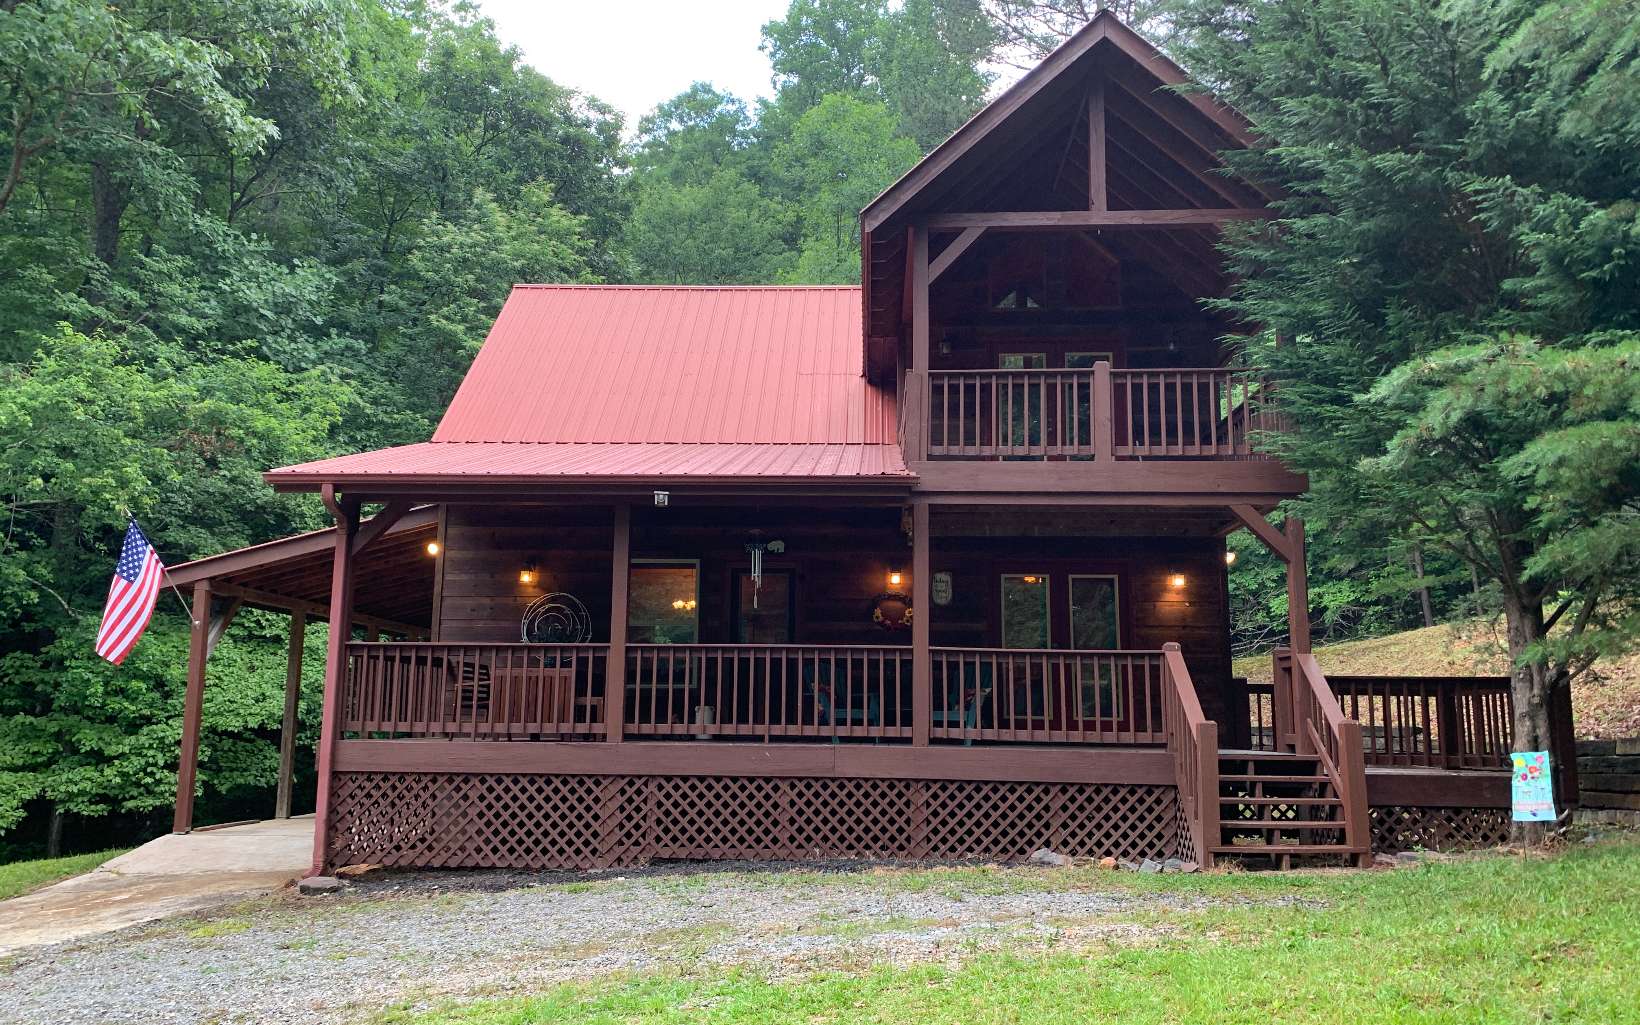 MOTIVATED SELLER! This Cabin Retreat located close to the Aska Adventure Area is being sold with two parcels totaling 2.982 acres. Parcel #1 includes 1.982 acres + gravel drive leading to existing cabin. Parcel #2 includes 1.00 acre buildable lot, gravel/dirt driveway, level area where previous cabin was built, plus a well. This lot could be great to build an additional rental cabin (check local building codes). Both parcels are divided by a flowing stream. Seller has plats, legal description, recorded driveway and well easement; available upon request. The 2 Bedroom / 2 Bath cabin has an open floor plan with knotty pine throughout, high ceilings, rock fireplace, nicely appointed kitchen, a laundry closet and 1 bed & 1 bath on main level with access to deck; the primary bedroom upstairs features a private bathroom with balcony, perfect to enjoy morning coffee. There is a large, covered deck with space and power for a spa; a single car carport plus the gravel drive allows for plenty of parking. This cabin has wonderful indoor and outdoor spaces for relaxing and entertaining; kickback by the fire-pit while listening to the babbling brook. Best of all, the property is conveniently situated in North GA; between Ellijay and Blue Ridge, and a short drive to great hiking and biking trails, Toccoa River & Lake Blue Ridge. This cabin is move-in ready as primary residence or great for Short Term Rental year-round.